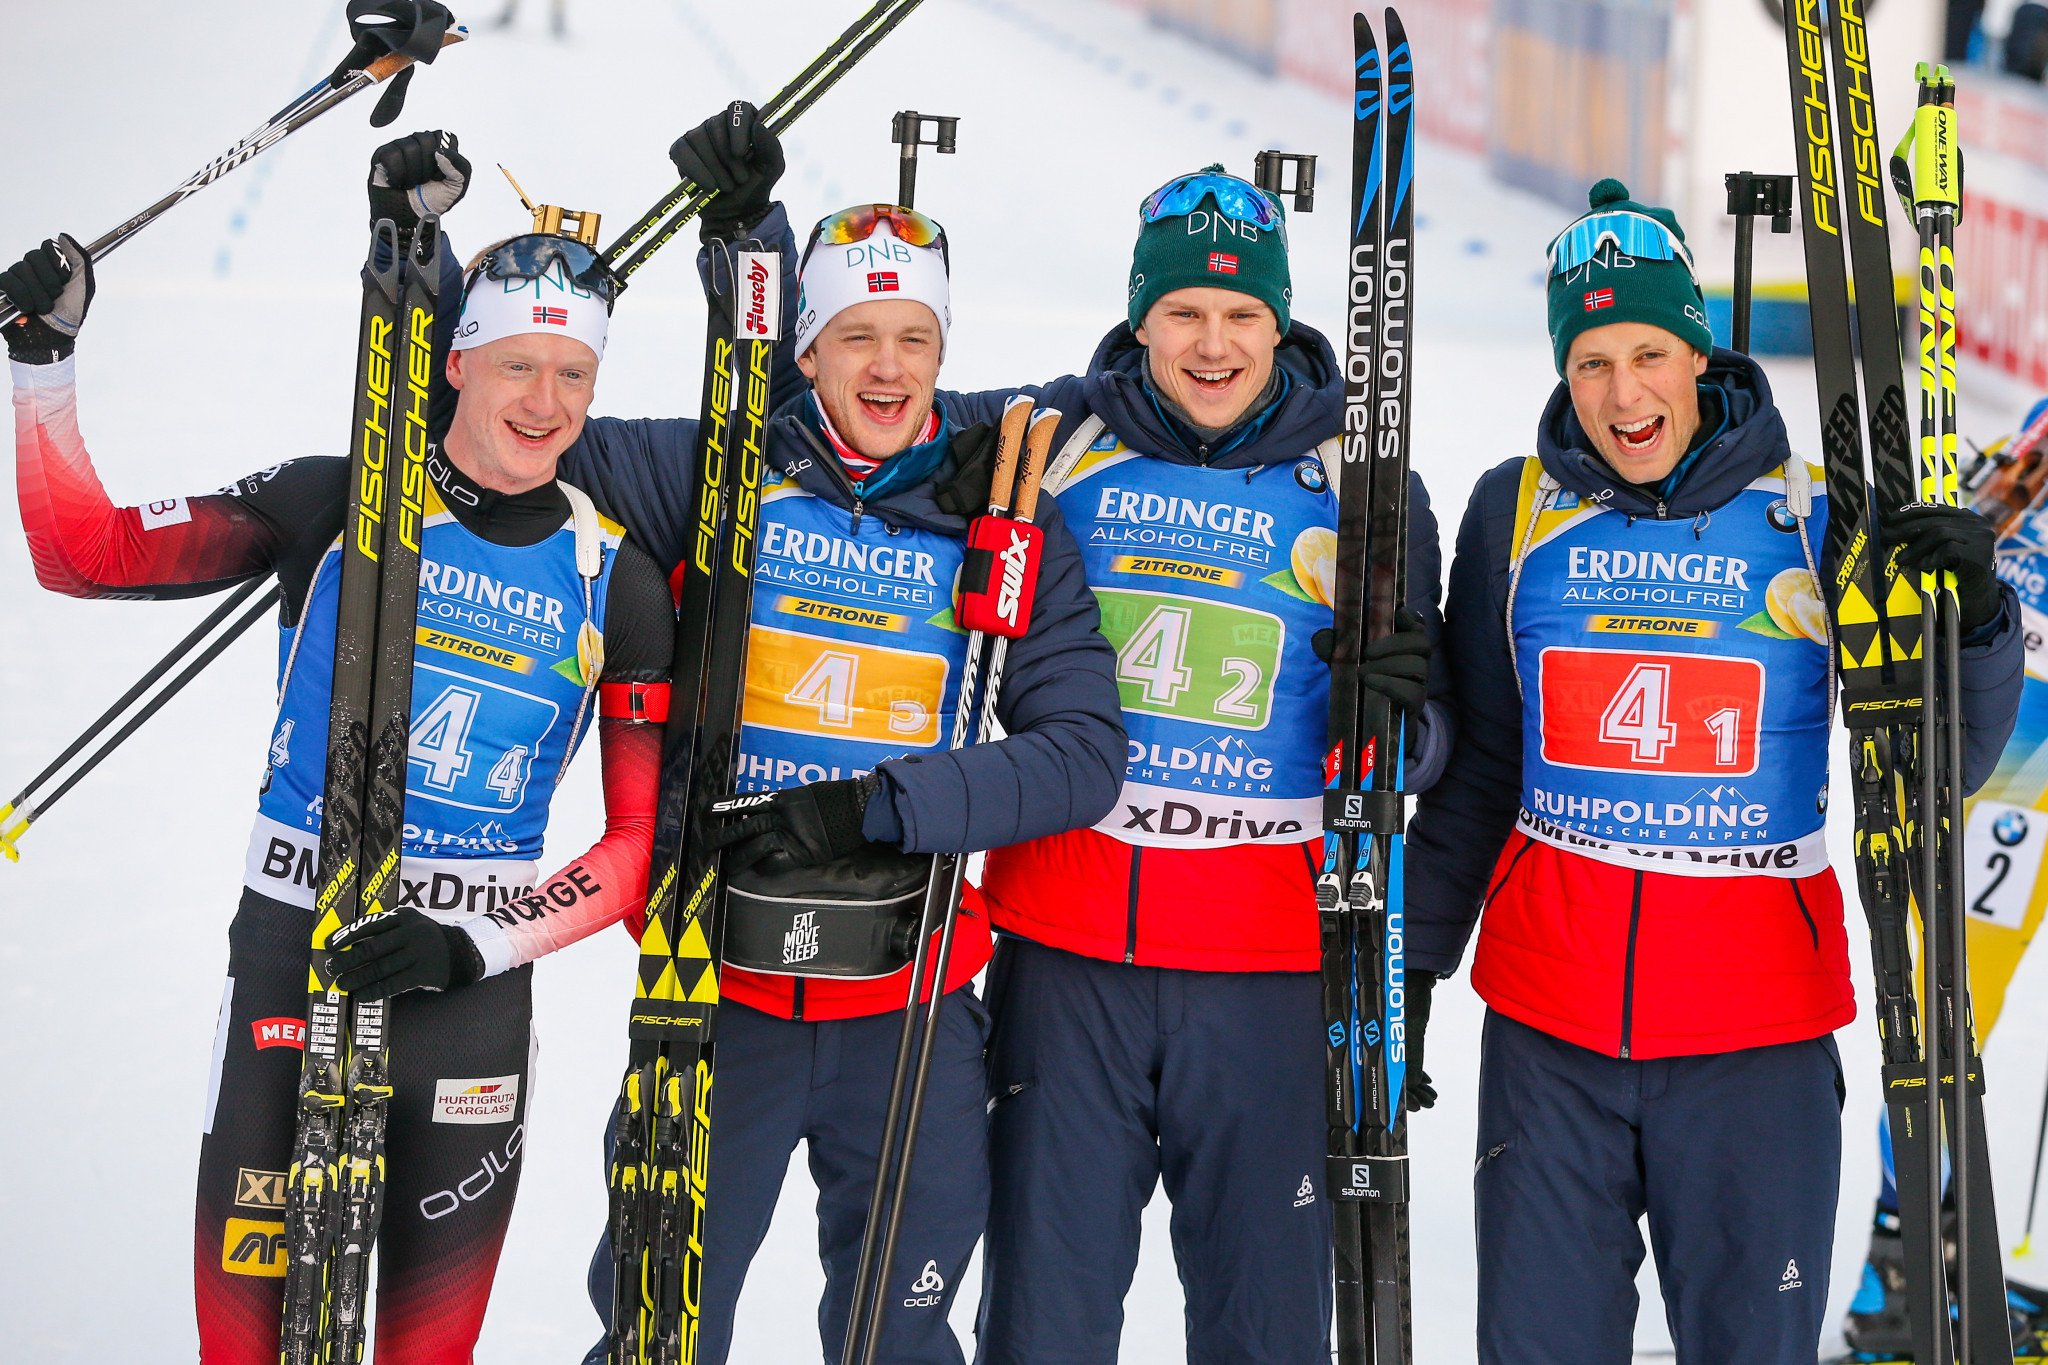 The Bø brothers Johannes and Tarjei alongside Lars Helge Birkeland and Vetle Sjaastad Christiansen won the men's relay today in Ruhpolding ©Getty Images